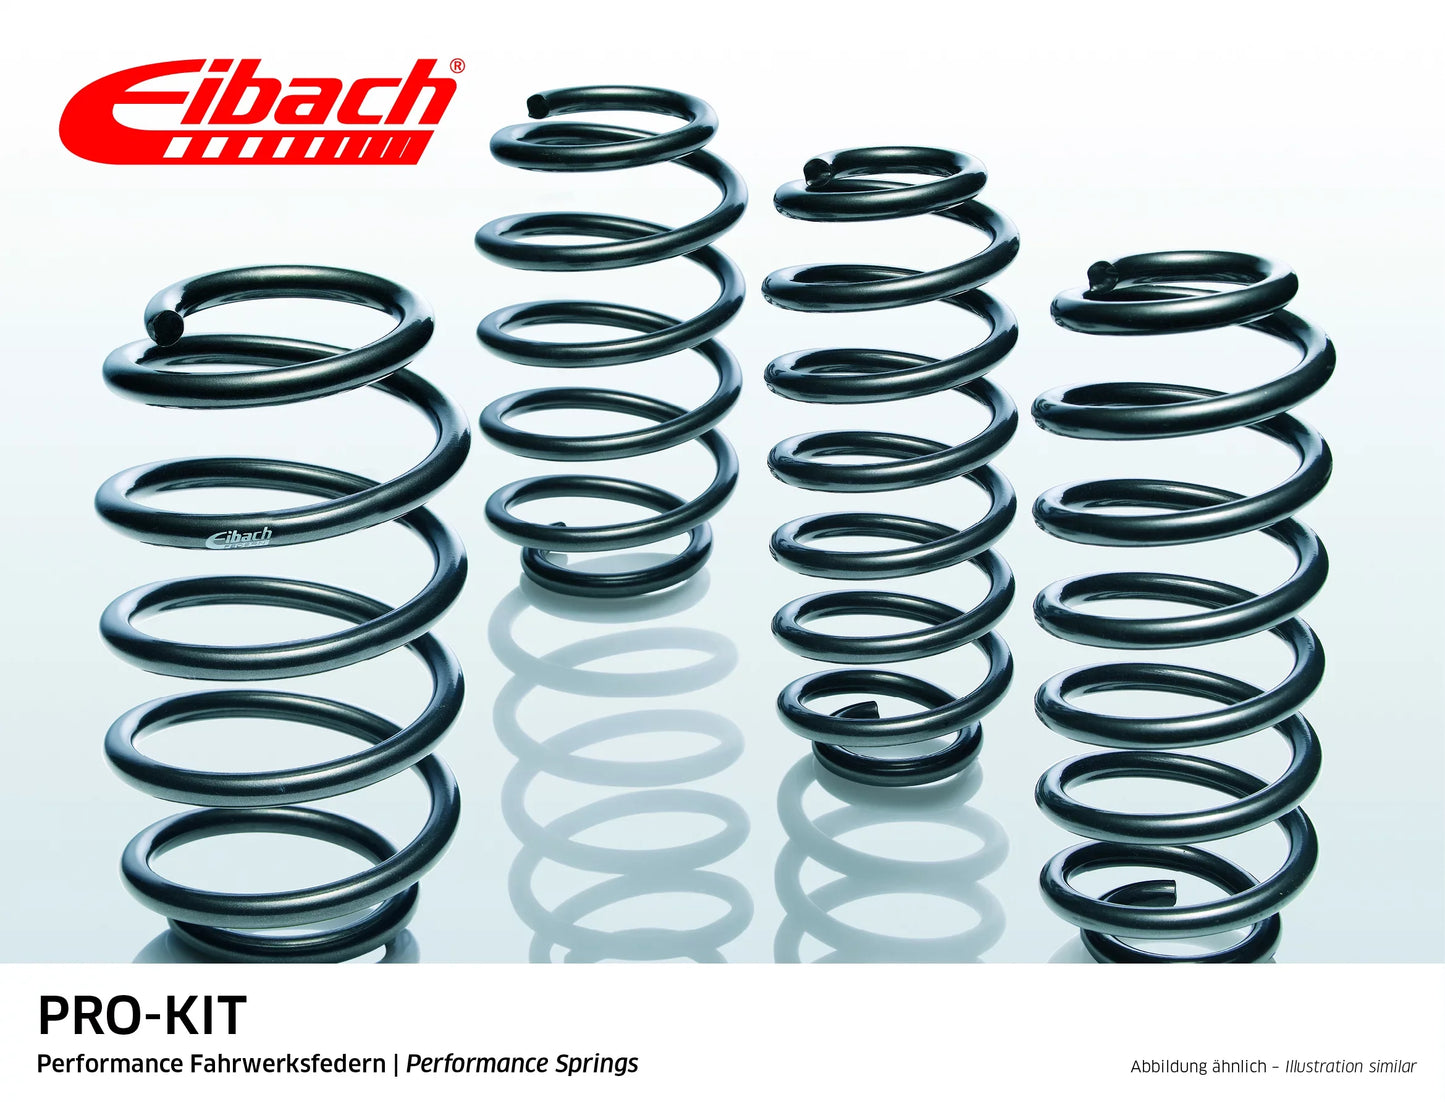 Eibach Pro-Kit Lowering Springs (E1545-140) at £192.72